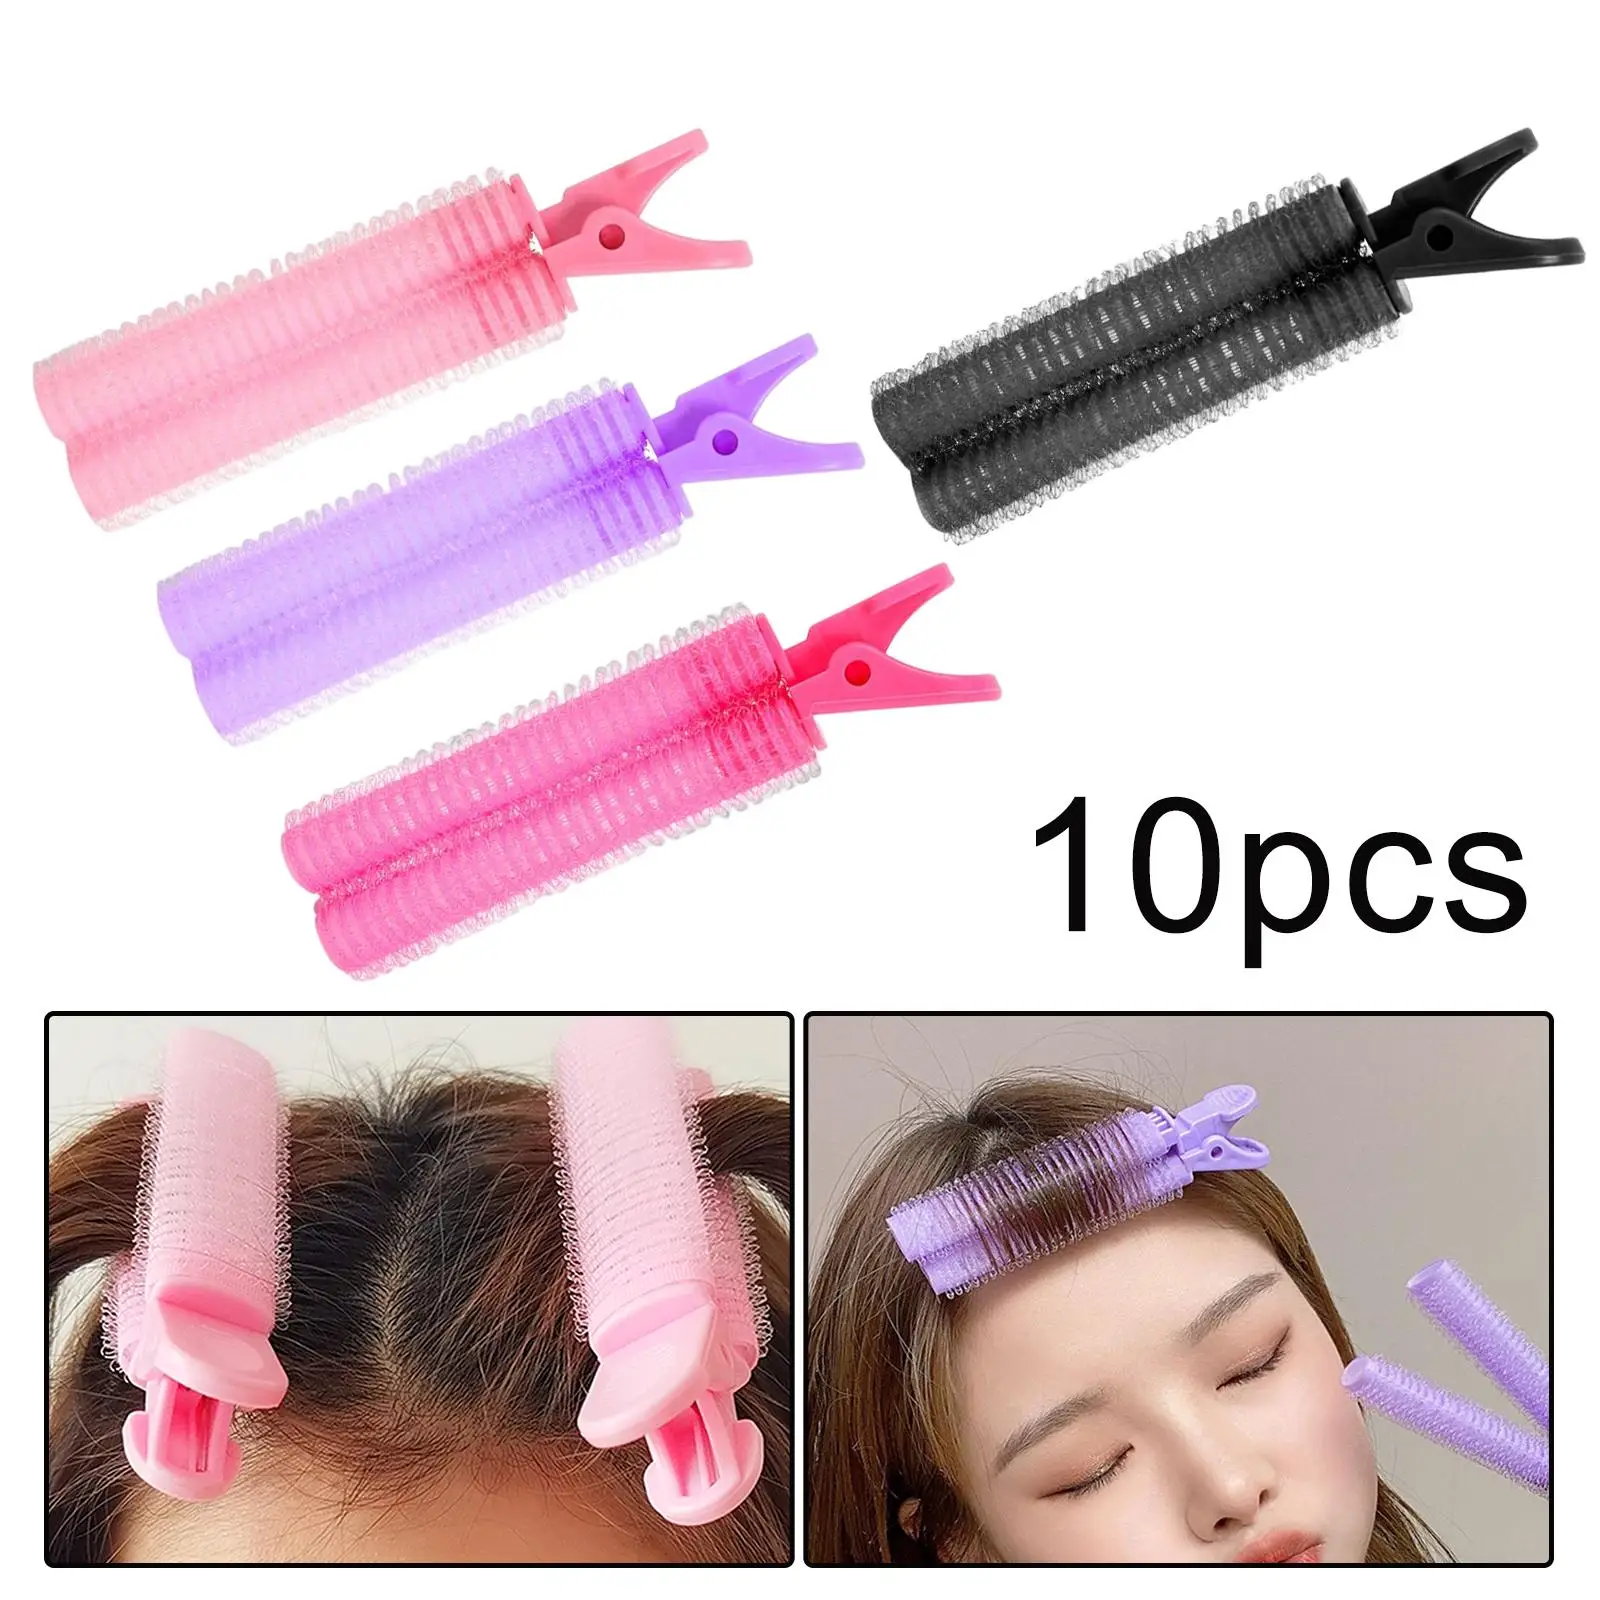 10 Pieces Hair Bangs Curling Clips Easy to Use Reusable Hair Curler Clips for Hair Styling Long Short Hair Hair Bangs Girls